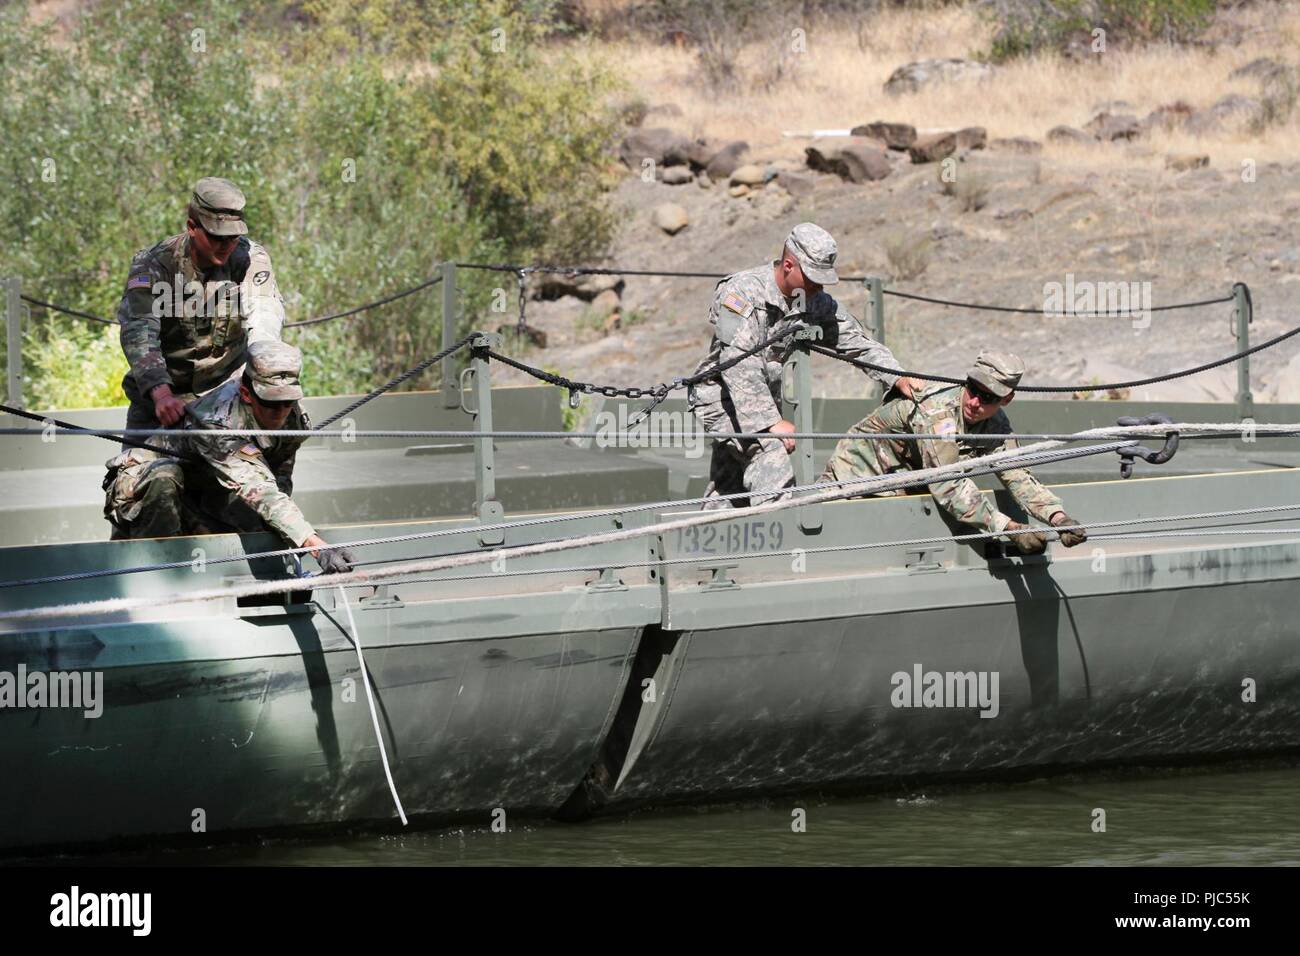 U.S. Army Soldiers from the California Army National Guard’s 132nd Multirole Bridge Company, 579th Engineer Battalion, 49th Military Police Brigade, secure tension cables that hold a floating bridge together July 13 at Cache Creek Regional Park, California. The 132nd erected a 100-foot temporary bridge to support heavy trucks and emergency vehicles battling Northern California wildfires. Shown: U.S. Army Spcs. Christian Berg, Bryce F. Jones, Aaron W. Parker and Michael Fereira. Stock Photo